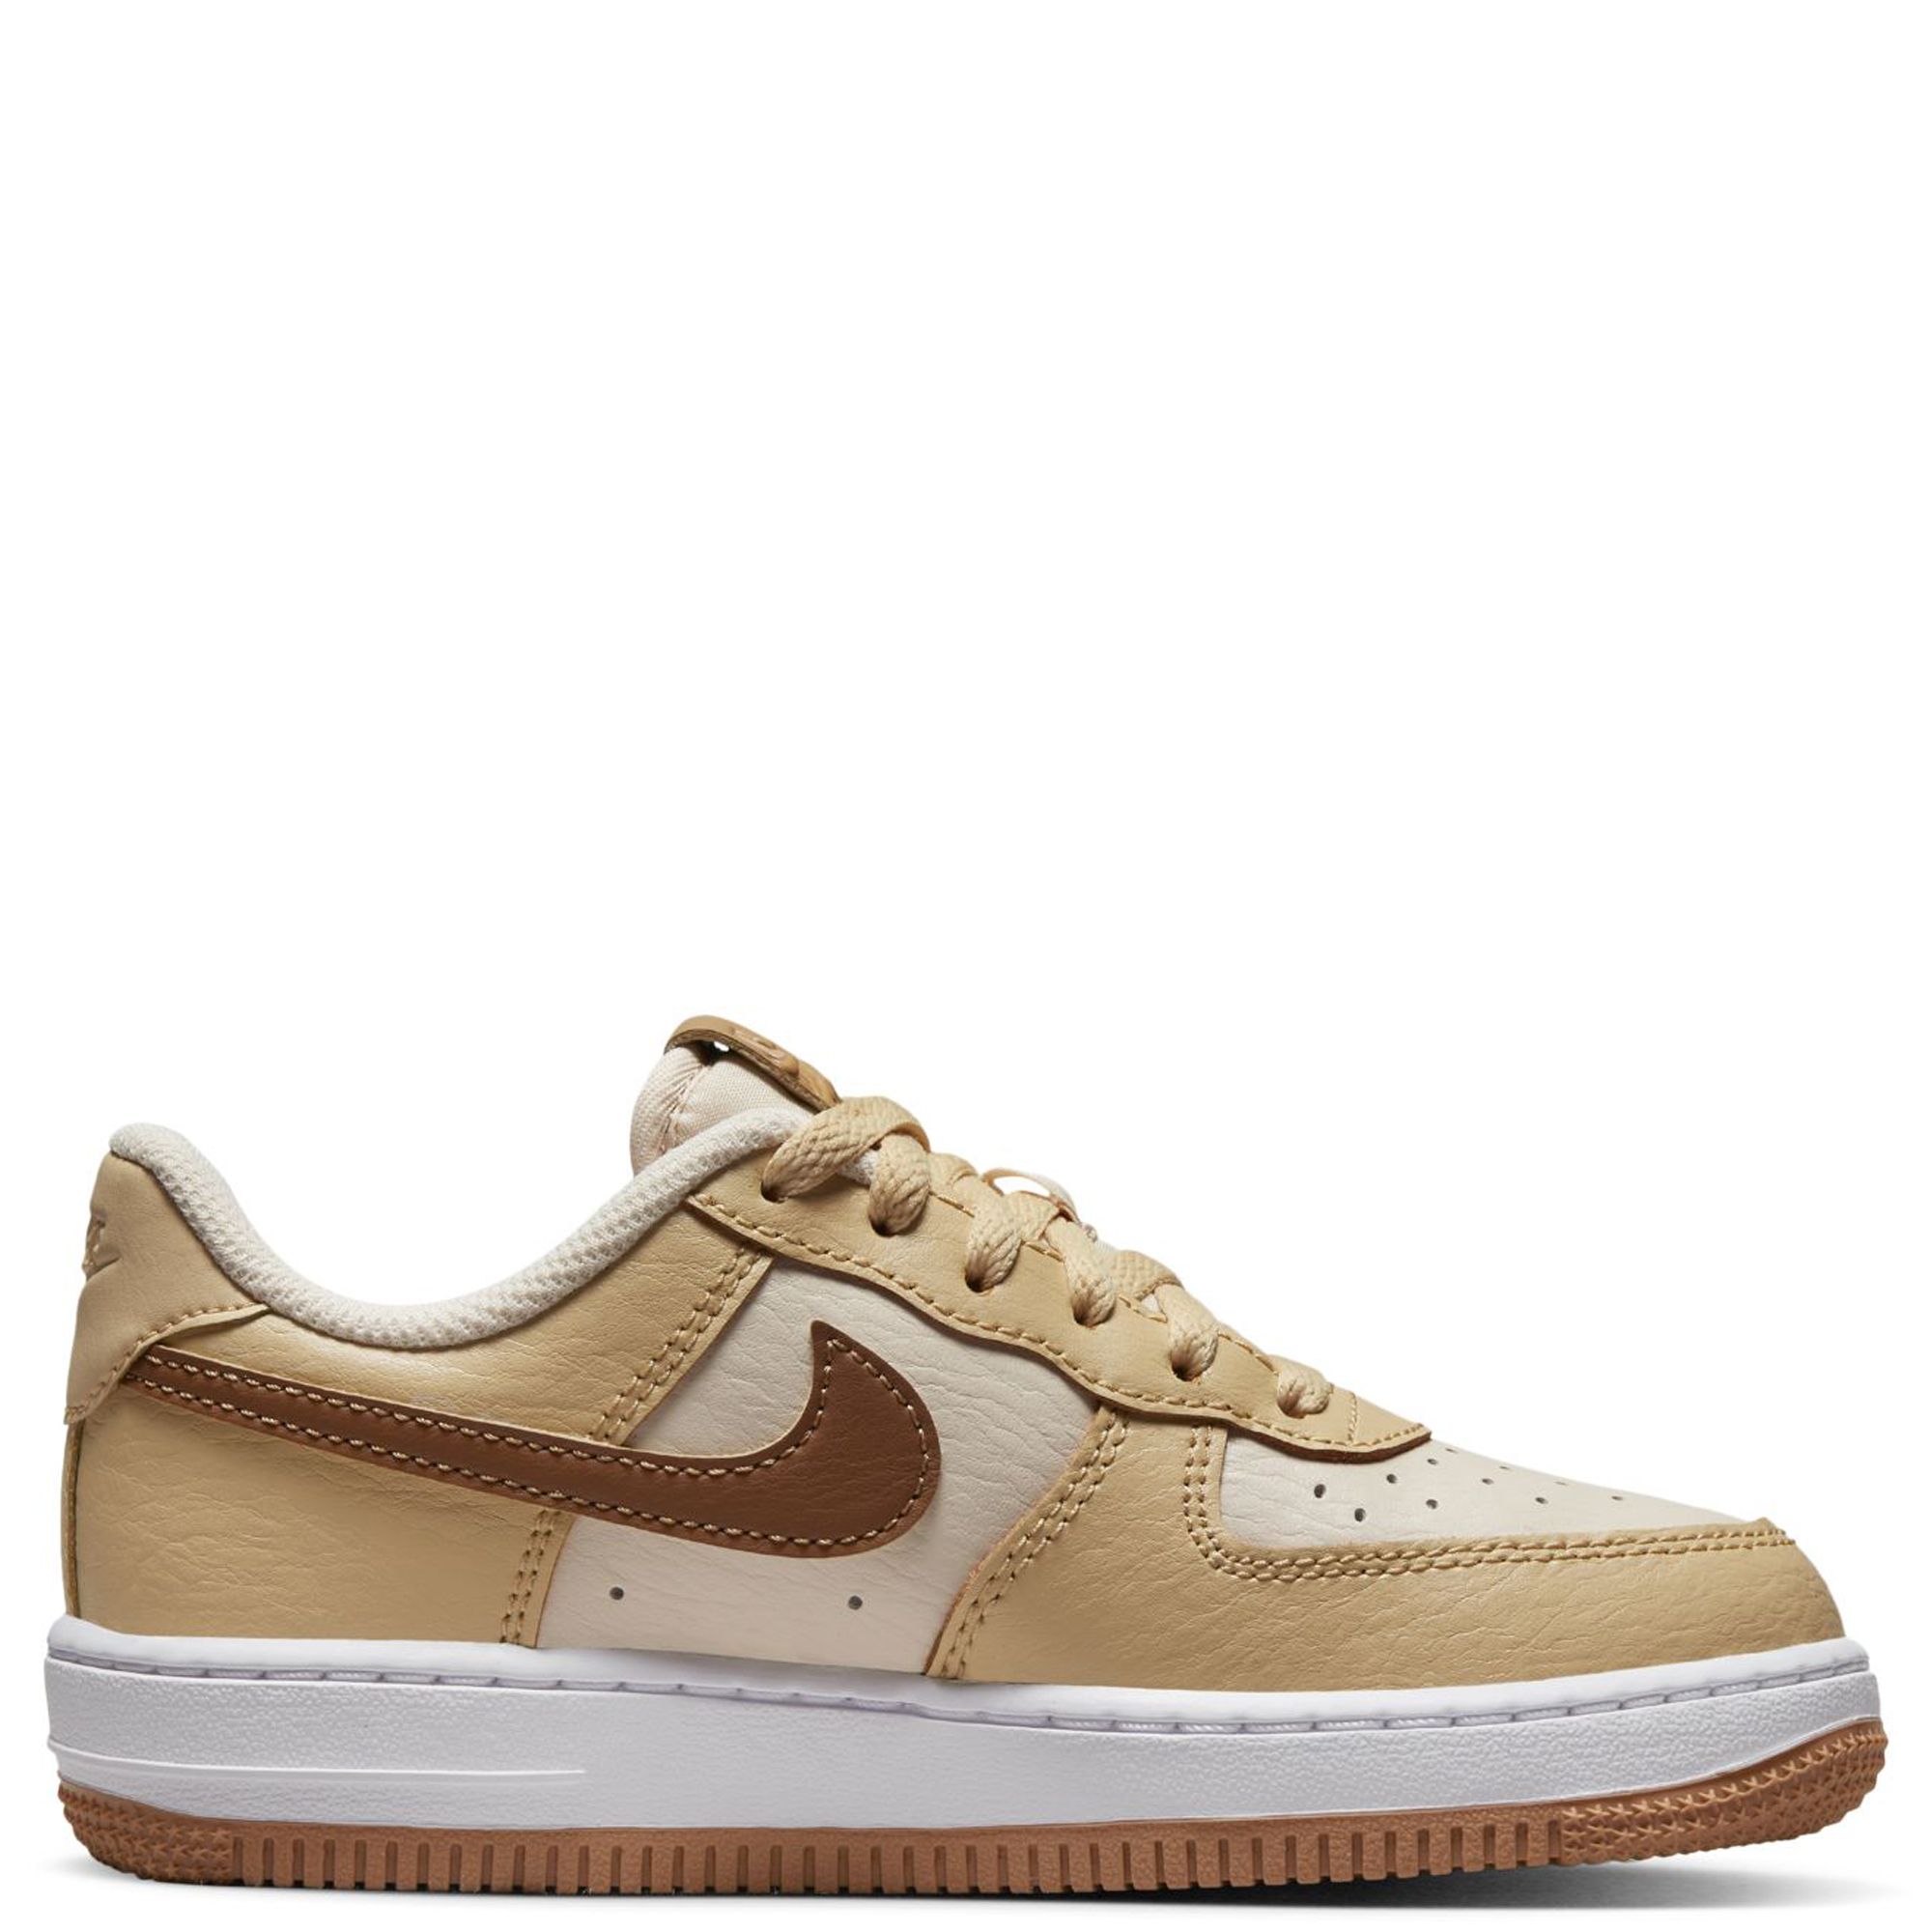 Buy Force 1 LV8 PS 'Ale Brown' - DQ5974 200